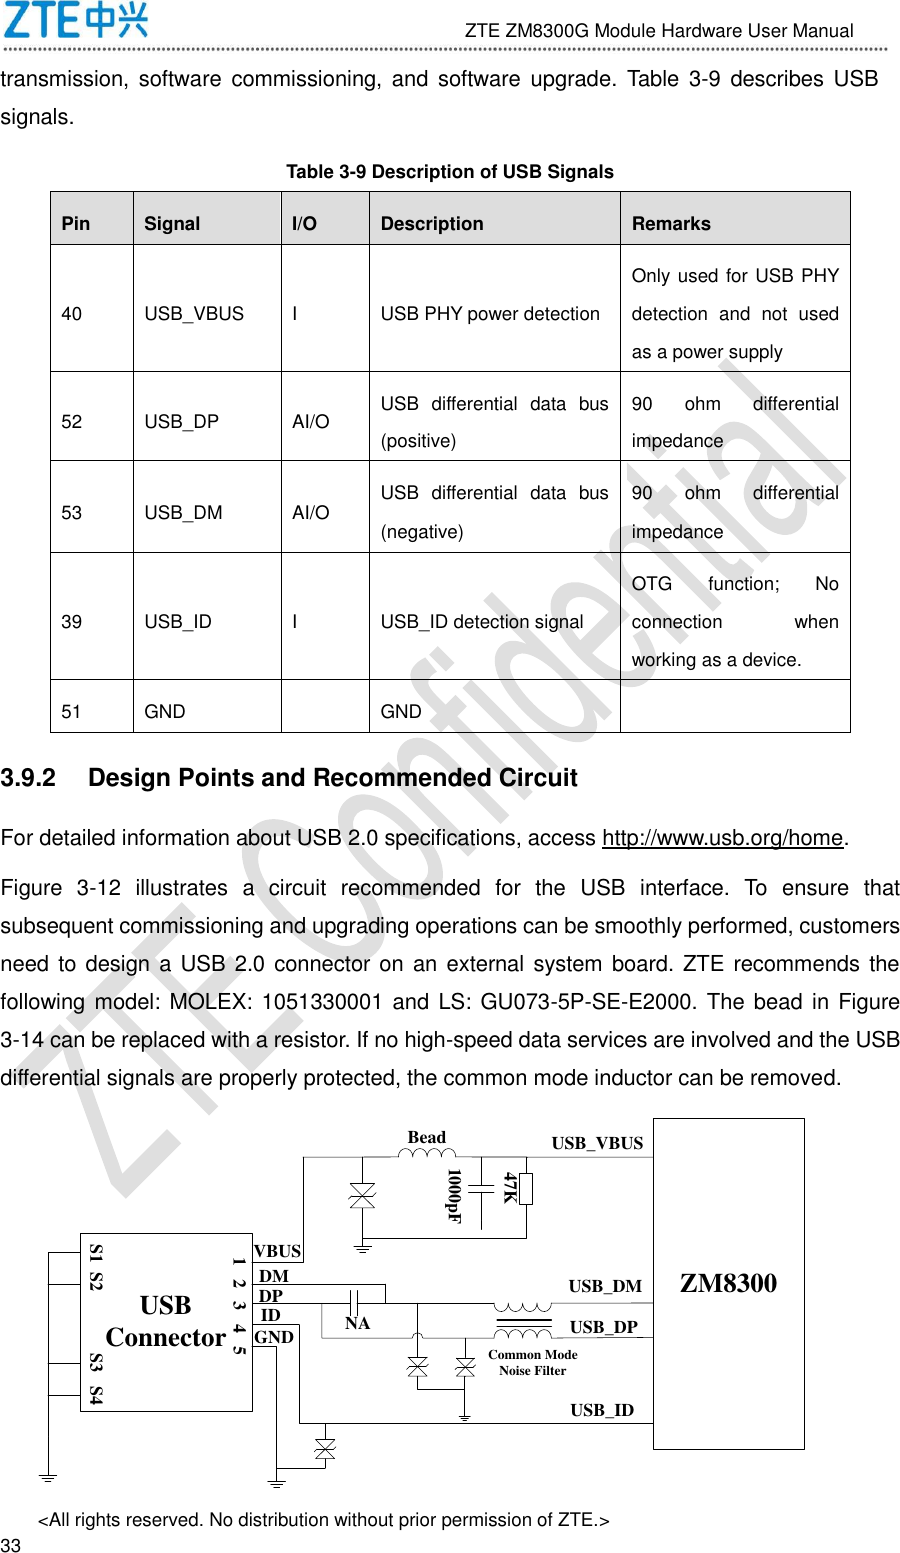                              ZTE ZM8300G Module Hardware User Manual &lt;All rights reserved. No distribution without prior permission of ZTE.&gt;                                                               33 transmission,  software  commissioning, and  software  upgrade.  Table 3-9  describes  USB signals. Table 3-9 Description of USB Signals Pin Signal I/O Description Remarks 40 USB_VBUS I USB PHY power detection Only used for USB PHY detection  and  not  used as a power supply 52 USB_DP AI/O USB  differential  data  bus (positive) 90  ohm  differential impedance 53 USB_DM AI/O USB  differential  data  bus (negative) 90  ohm  differential impedance 39 USB_ID I USB_ID detection signal OTG  function;  No connection  when working as a device. 51 GND  GND  3.9.2  Design Points and Recommended Circuit For detailed information about USB 2.0 specifications, access http://www.usb.org/home. Figure  3-12  illustrates  a  circuit  recommended  for  the  USB  interface.  To  ensure  that subsequent commissioning and upgrading operations can be smoothly performed, customers need to design a USB 2.0 connector on  an external system board. ZTE recommends the following model: MOLEX: 1051330001 and  LS: GU073-5P-SE-E2000. The bead in Figure 3-14 can be replaced with a resistor. If no high-speed data services are involved and the USB differential signals are properly protected, the common mode inductor can be removed. ZM8300USBConnector1   2   3   4   5S1  S2 S3   S4VBUSDMDPIDGNDUSB_VBUSUSB_DMUSB_DPUSB_IDBead1000pF47KNACommon Mode Noise Filter 